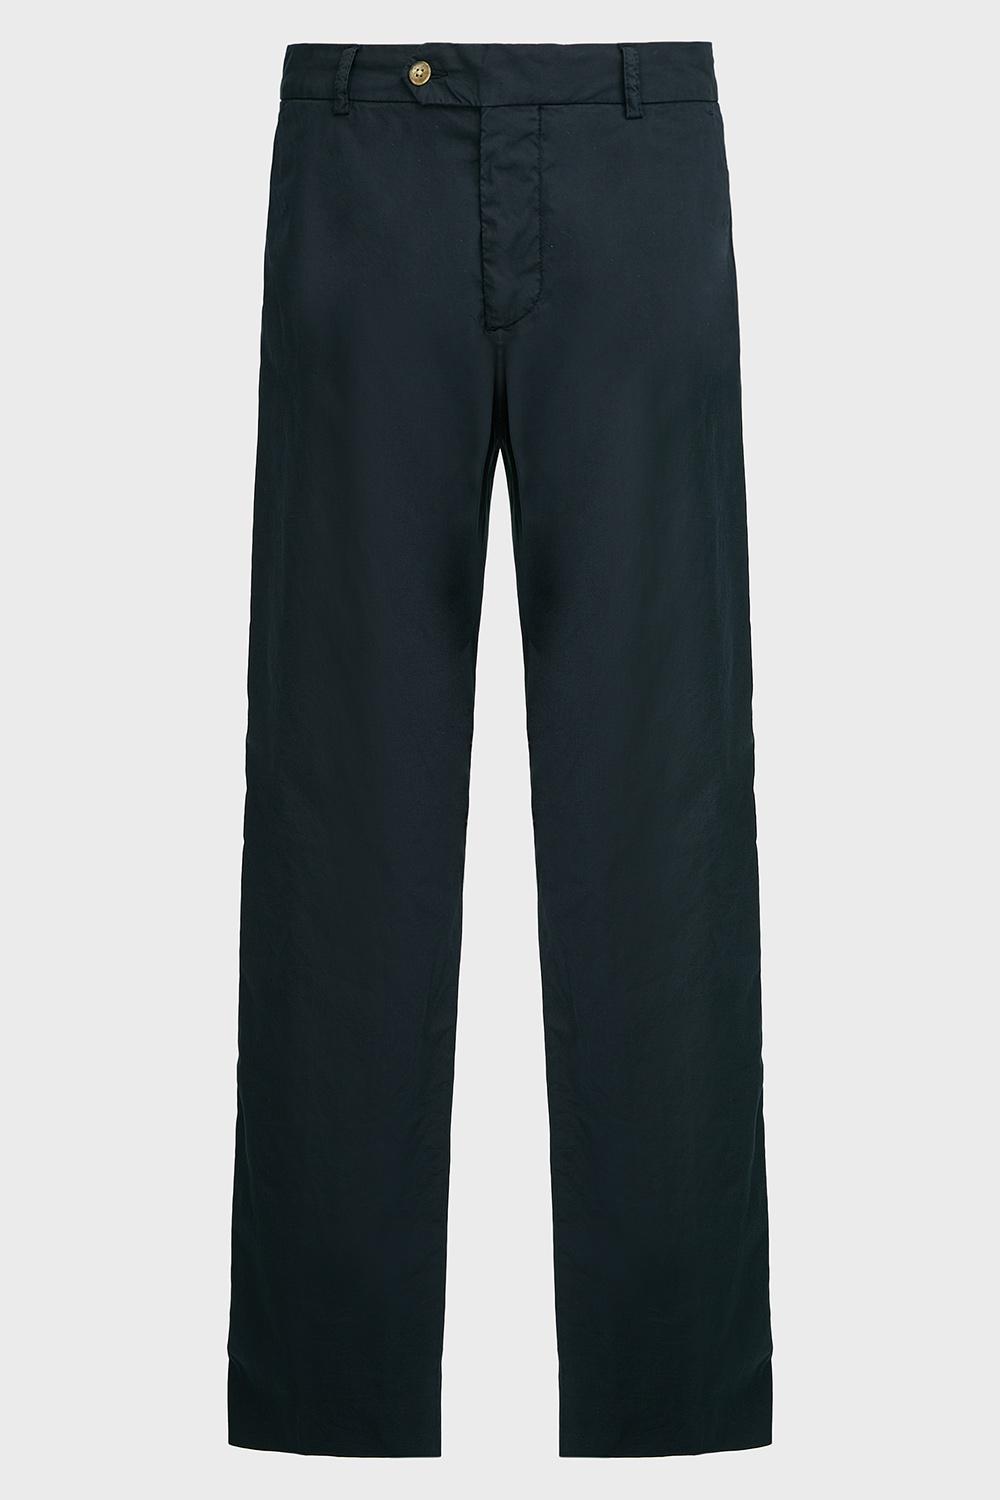 Frescobol Carioca Linen Tailored Chino Trousers in Blue for Men - Lyst